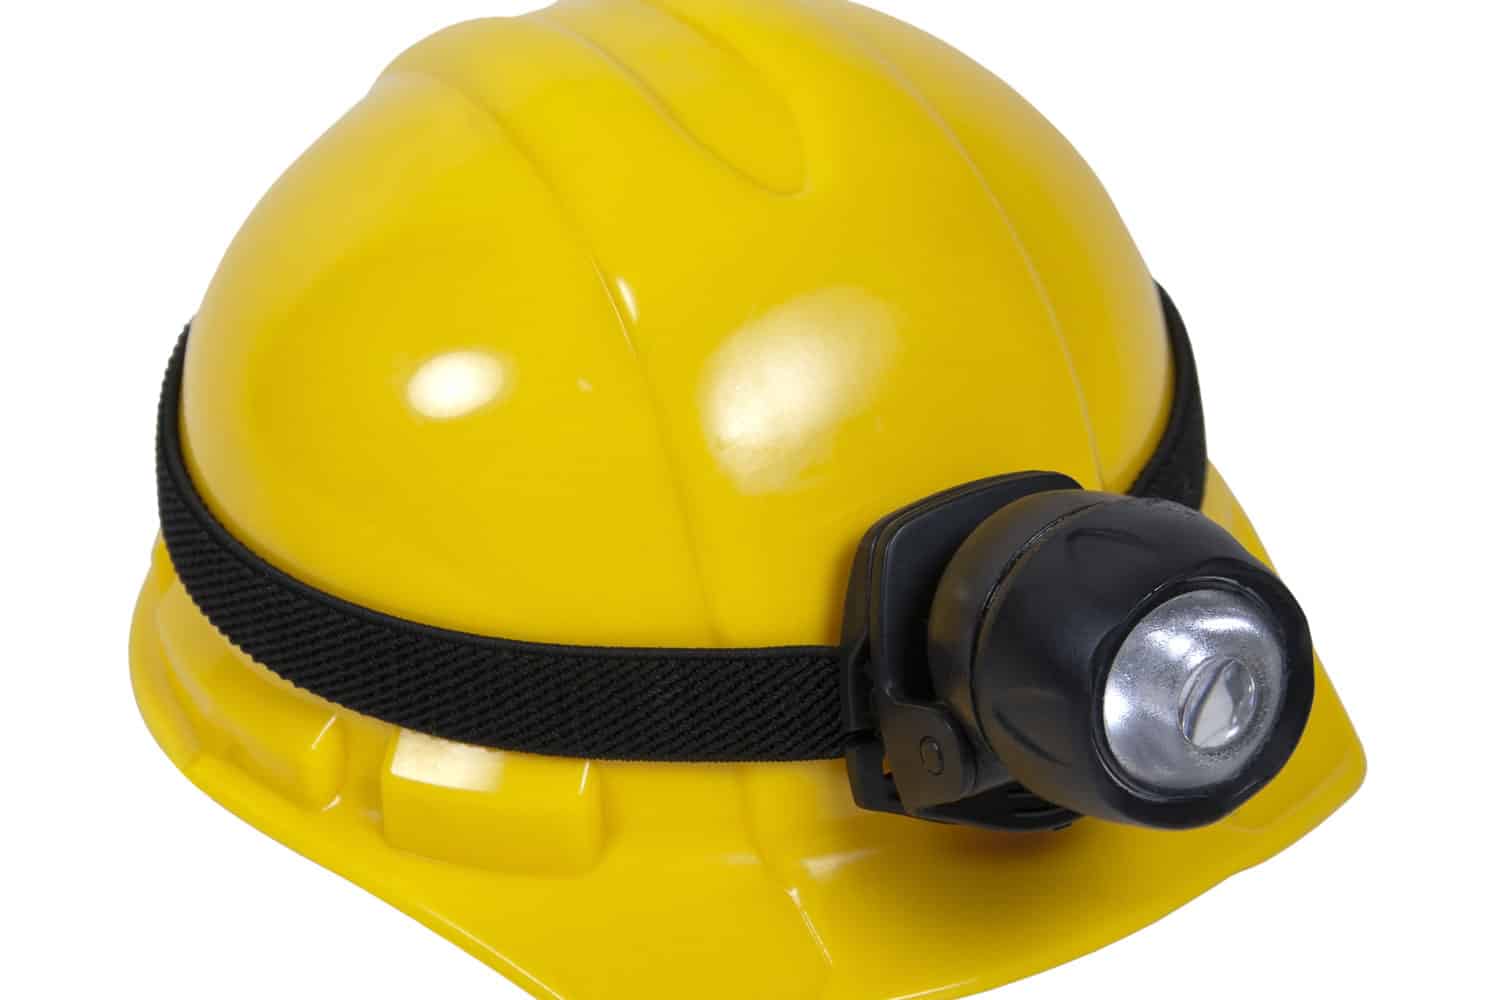 Yellow hard hat with large lamp for working in dangerous dark areas - path included 